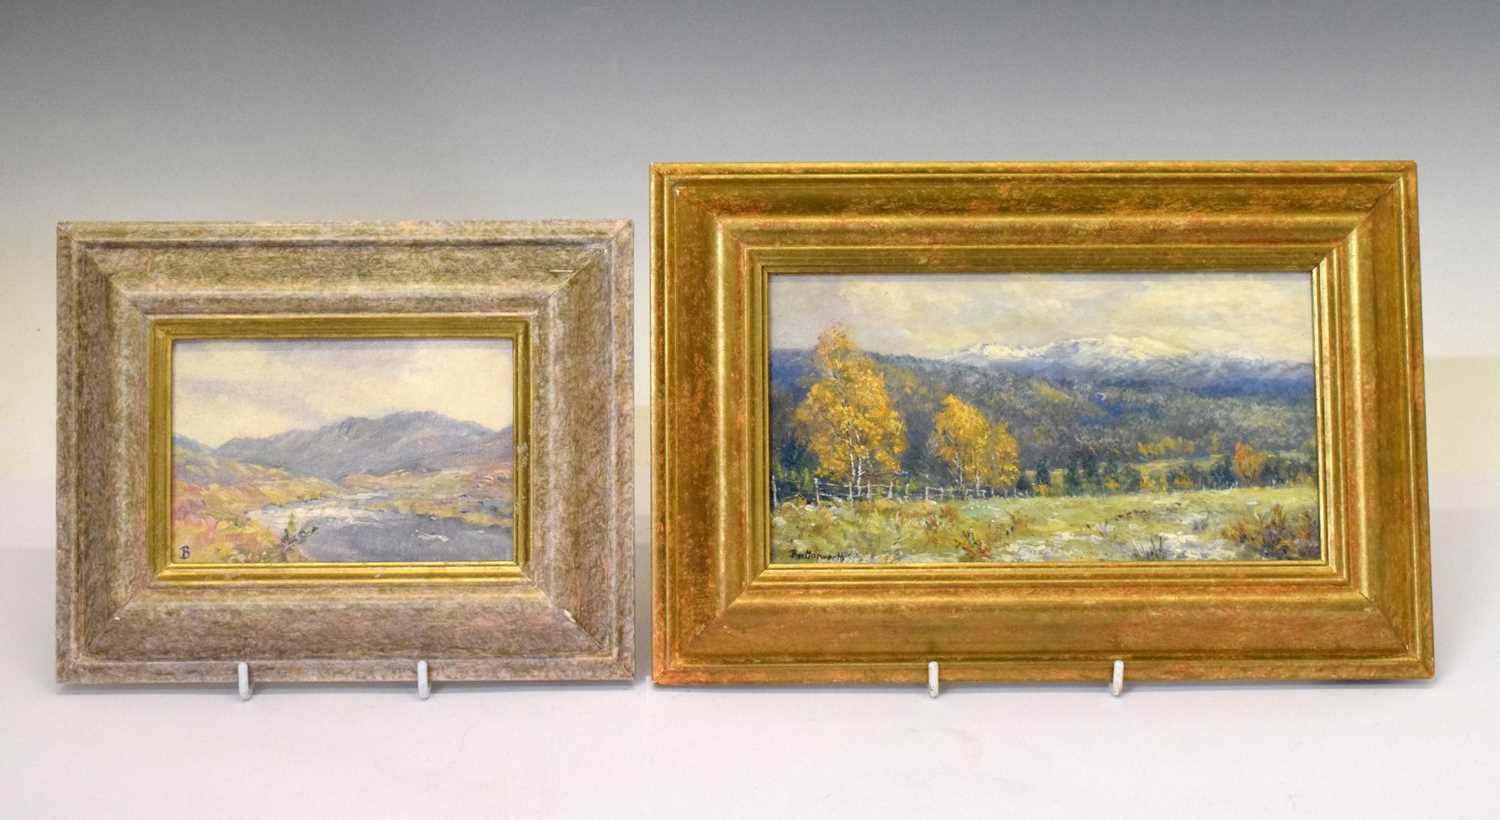 Lot 555 - Howard Butterworth (Scottish, B.1945) - Pair of acrylic on board - Highland landscapes